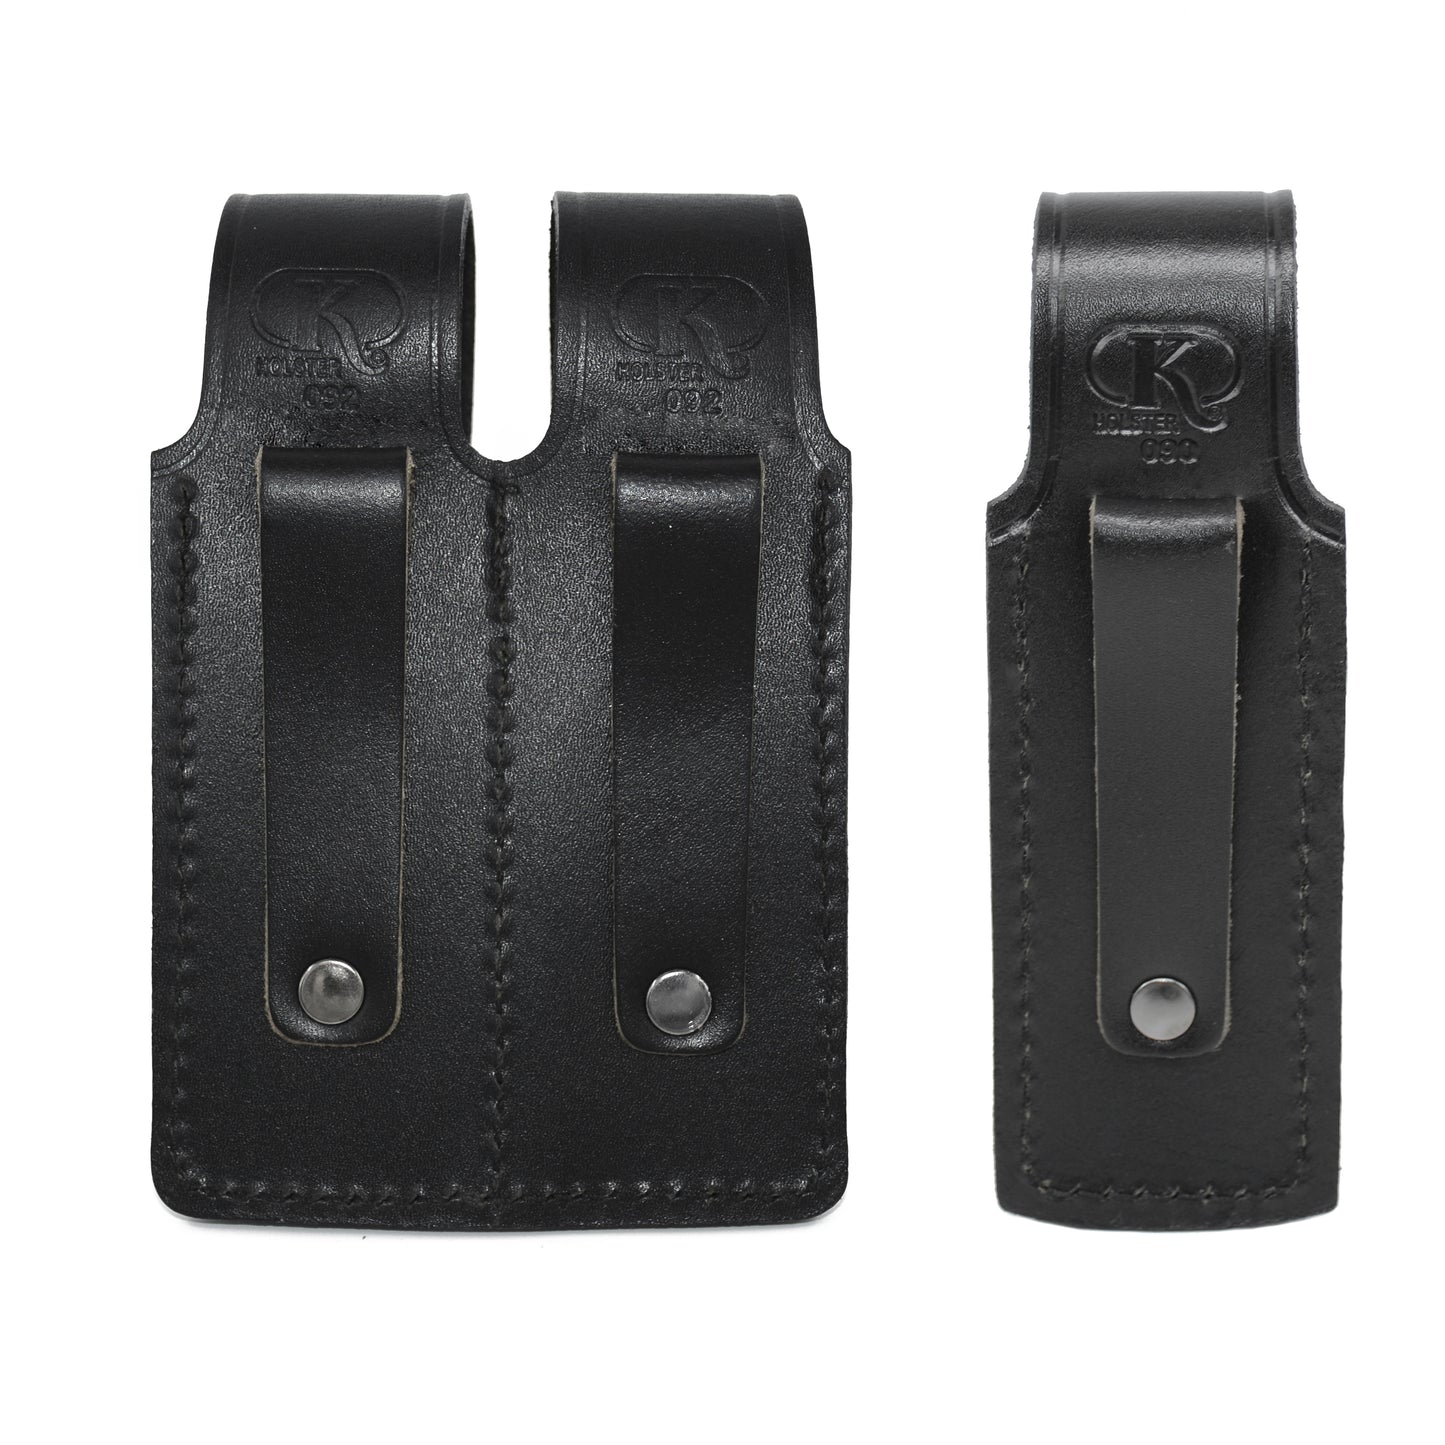 Holster ALIS9092 Leather Single & Double Magazine Pouch for Glock 17 19 22 23 Handmade!